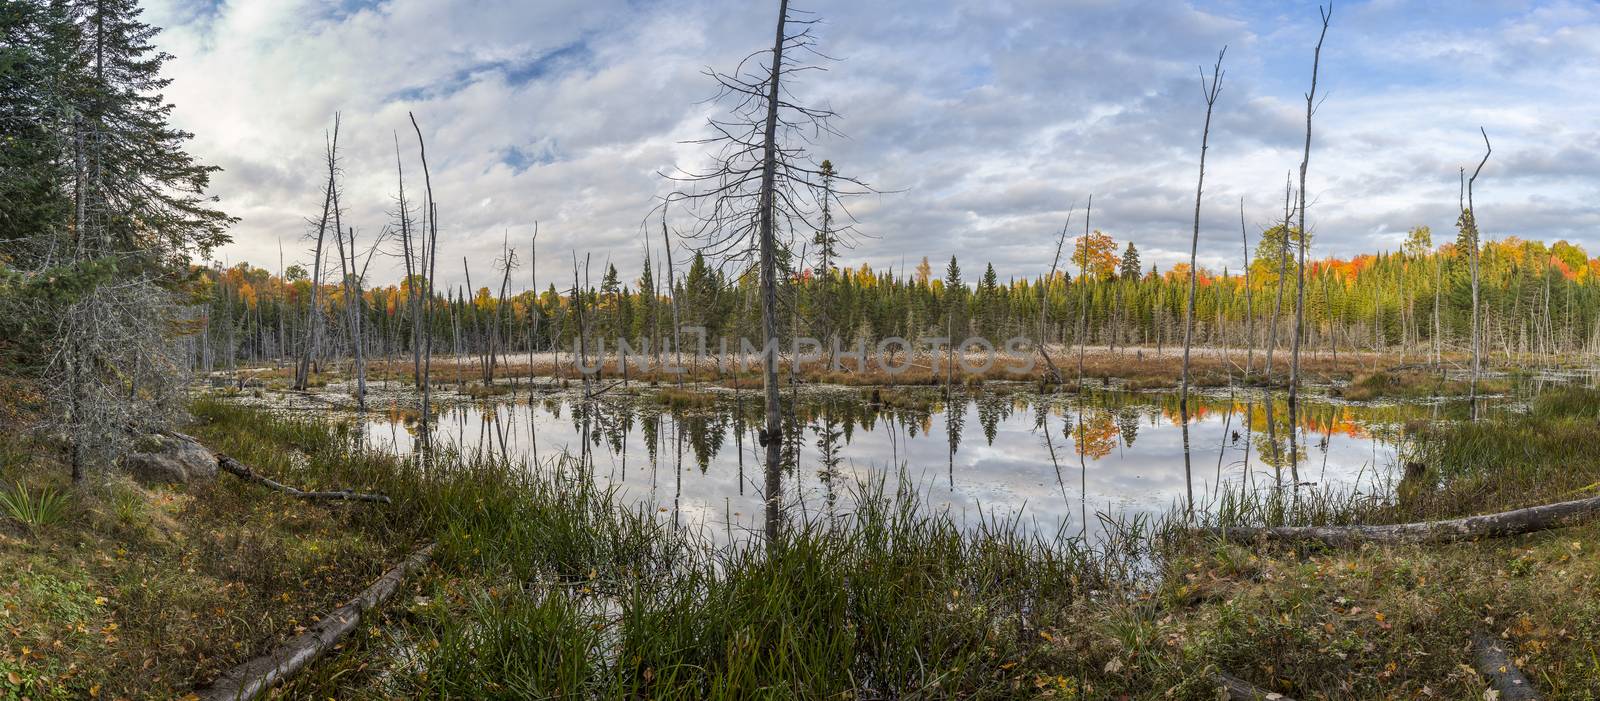 Panorama of a Beaver Pond in Autumn - Ontario, Canada